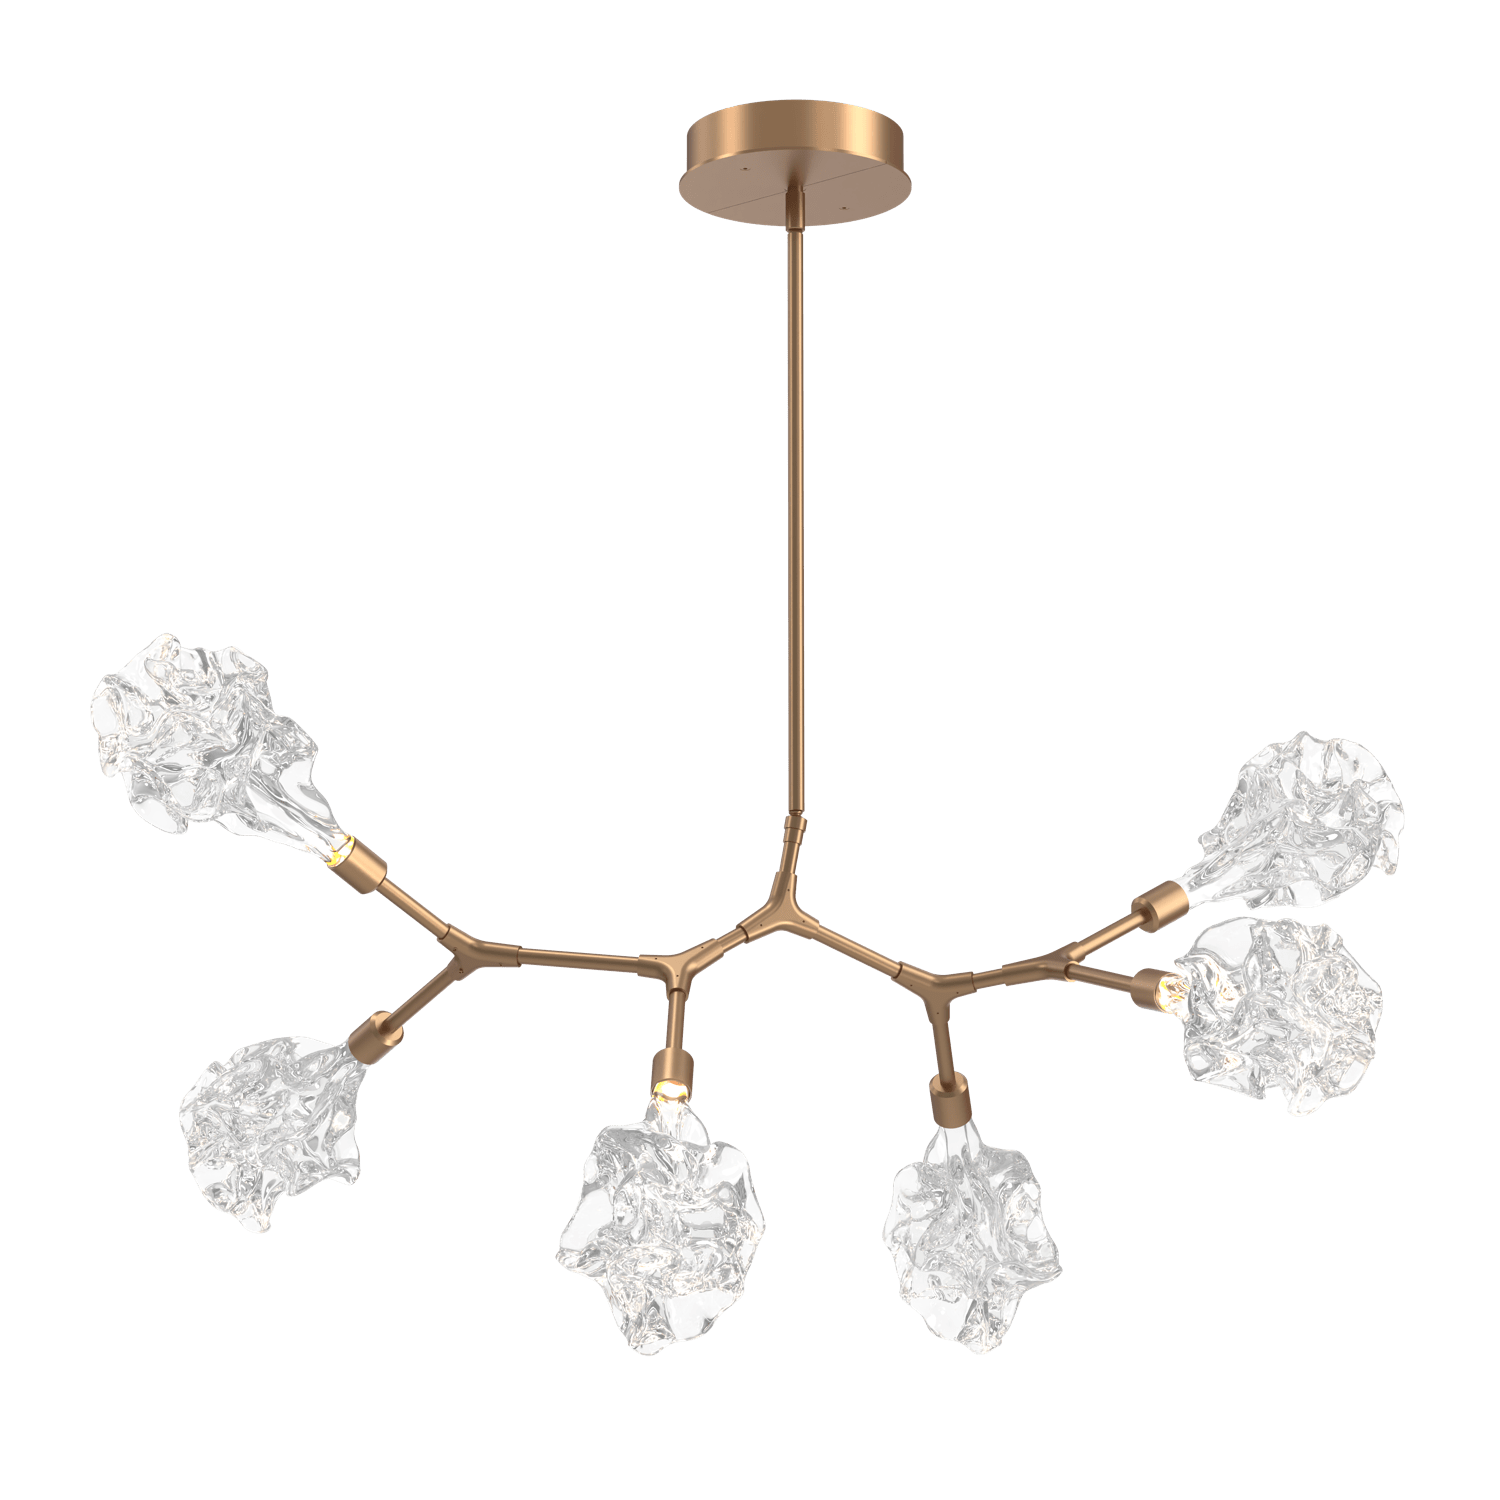 PLB0059-BA-NB-Hammerton-Studio-Blossom-6-light-organic-branch-chandelier-with-novel-brass-finish-and-clear-handblown-crystal-glass-shades-and-LED-lamping